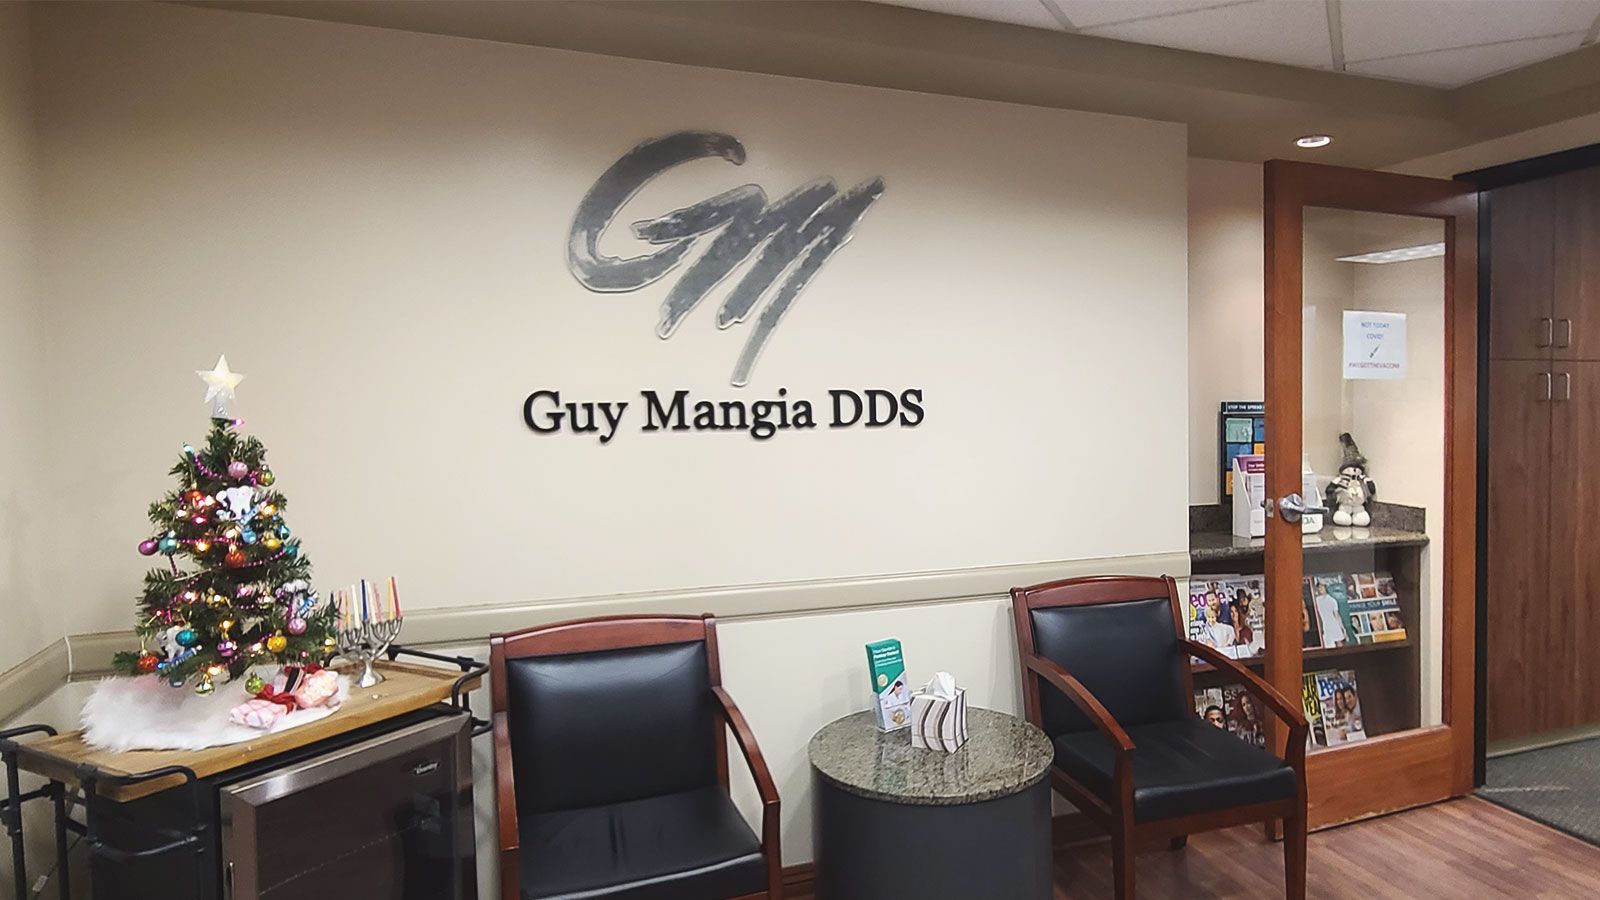 Guy Mangia DDS 3D letters